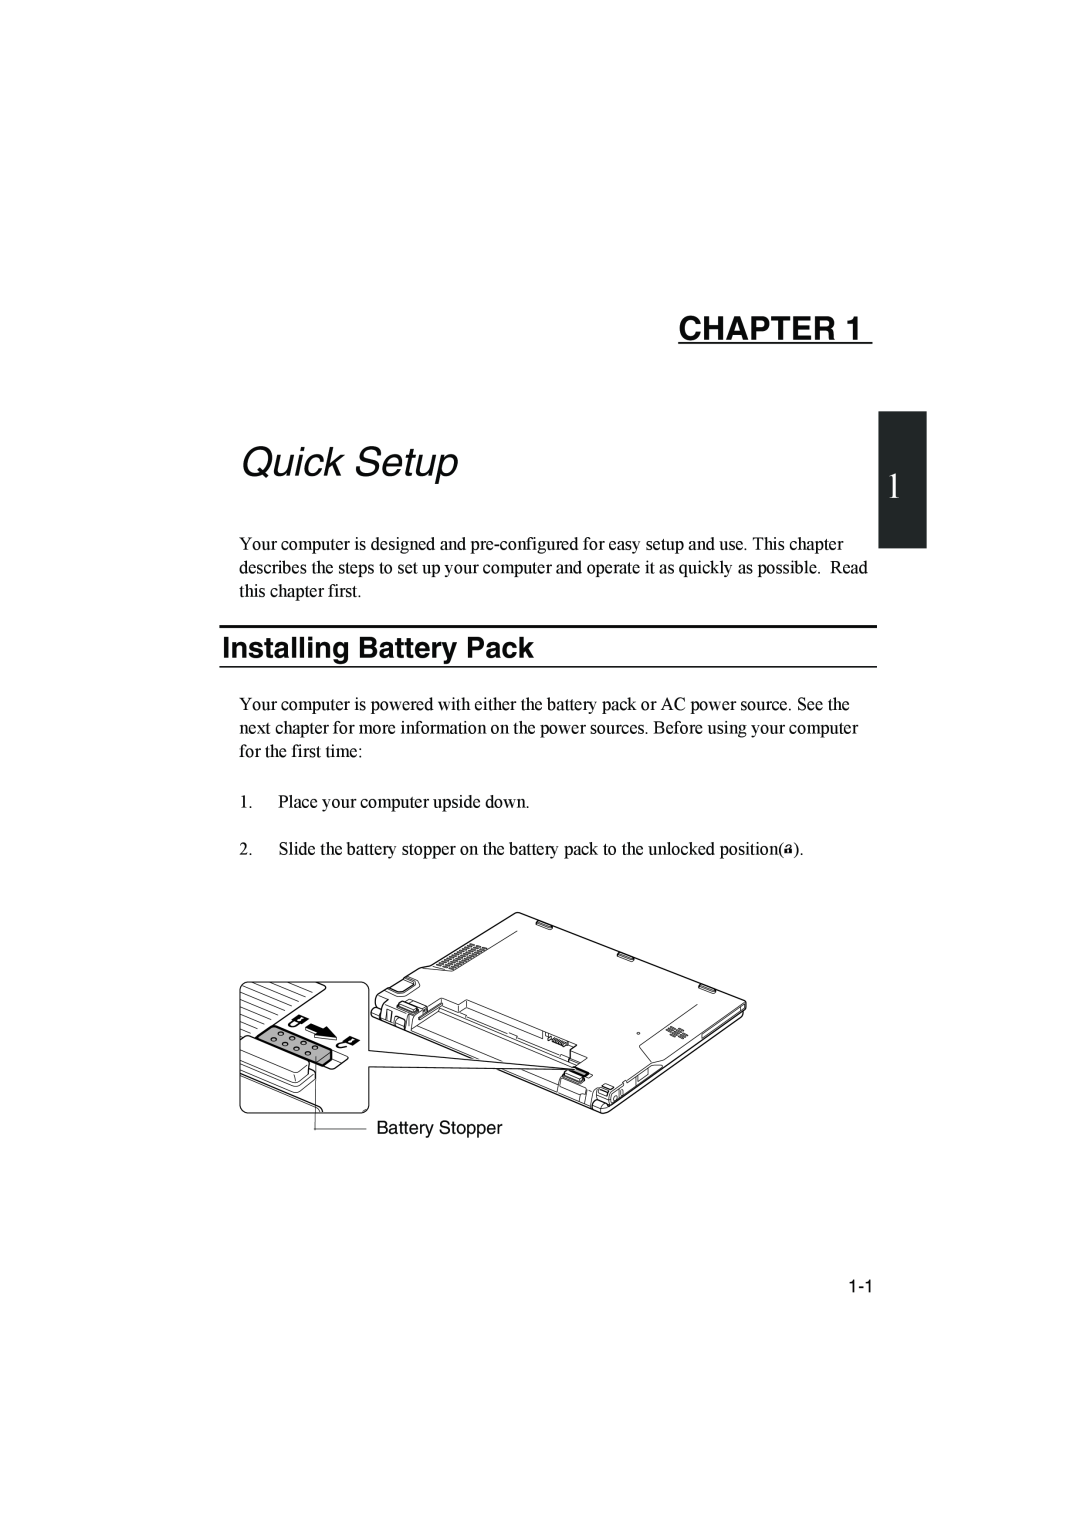 Sharp PC-MM1 manual Chapter, Installing Battery Pack, Quick Setup 